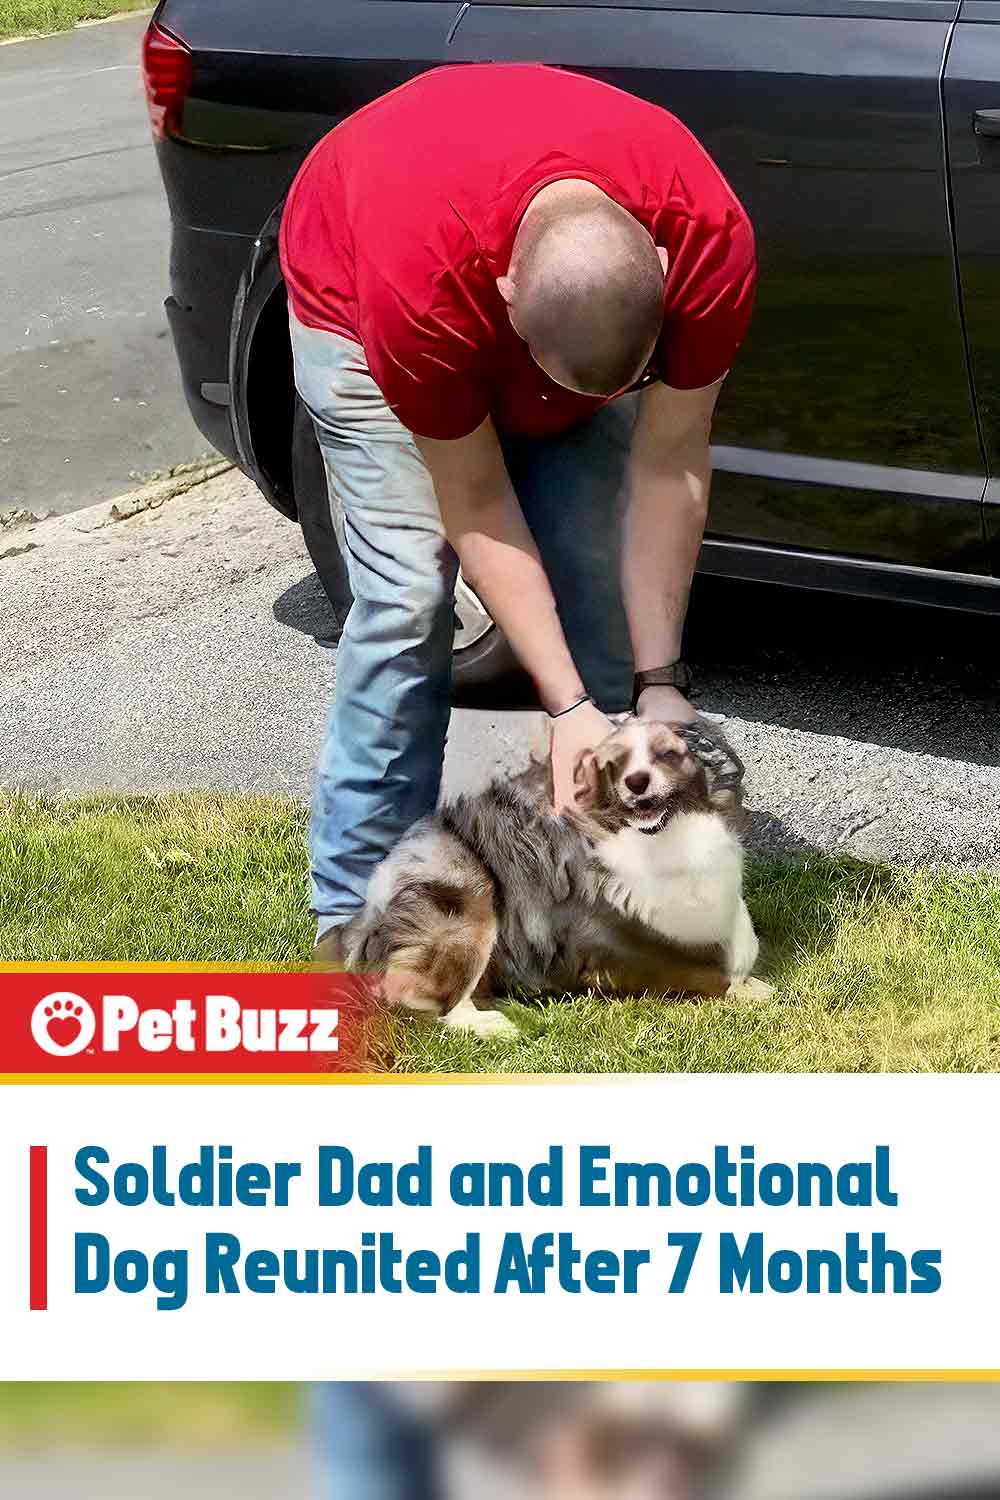 Soldier Dad and Emotional Dog Reunited After 7 Months